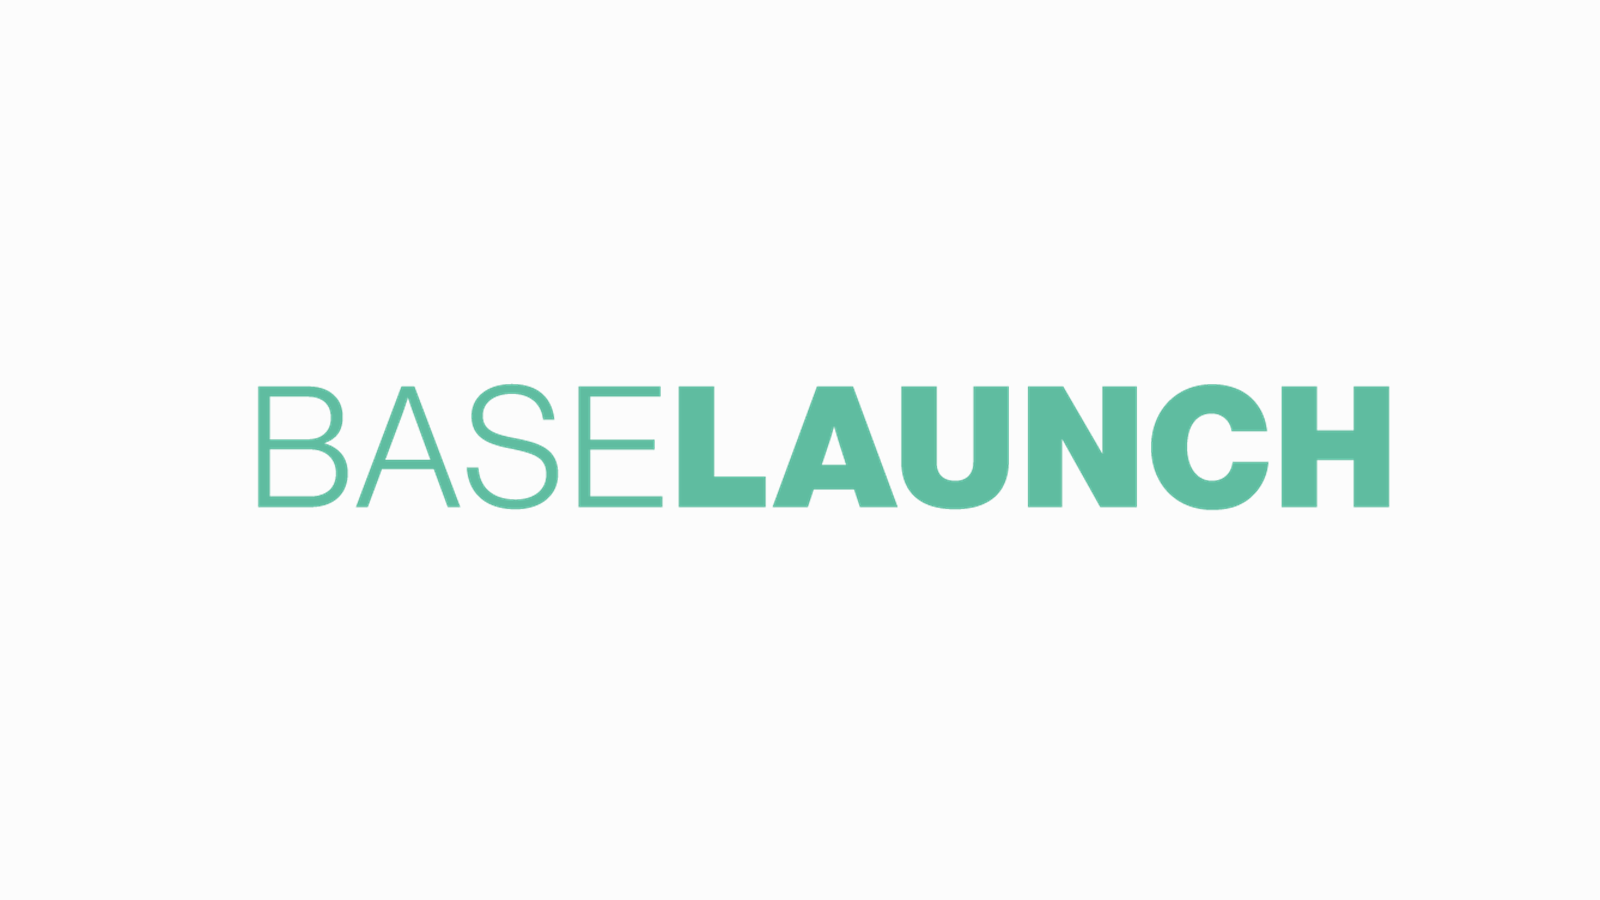 Green logo for BaseLaunch, an incubator for startup companies in Switzerland